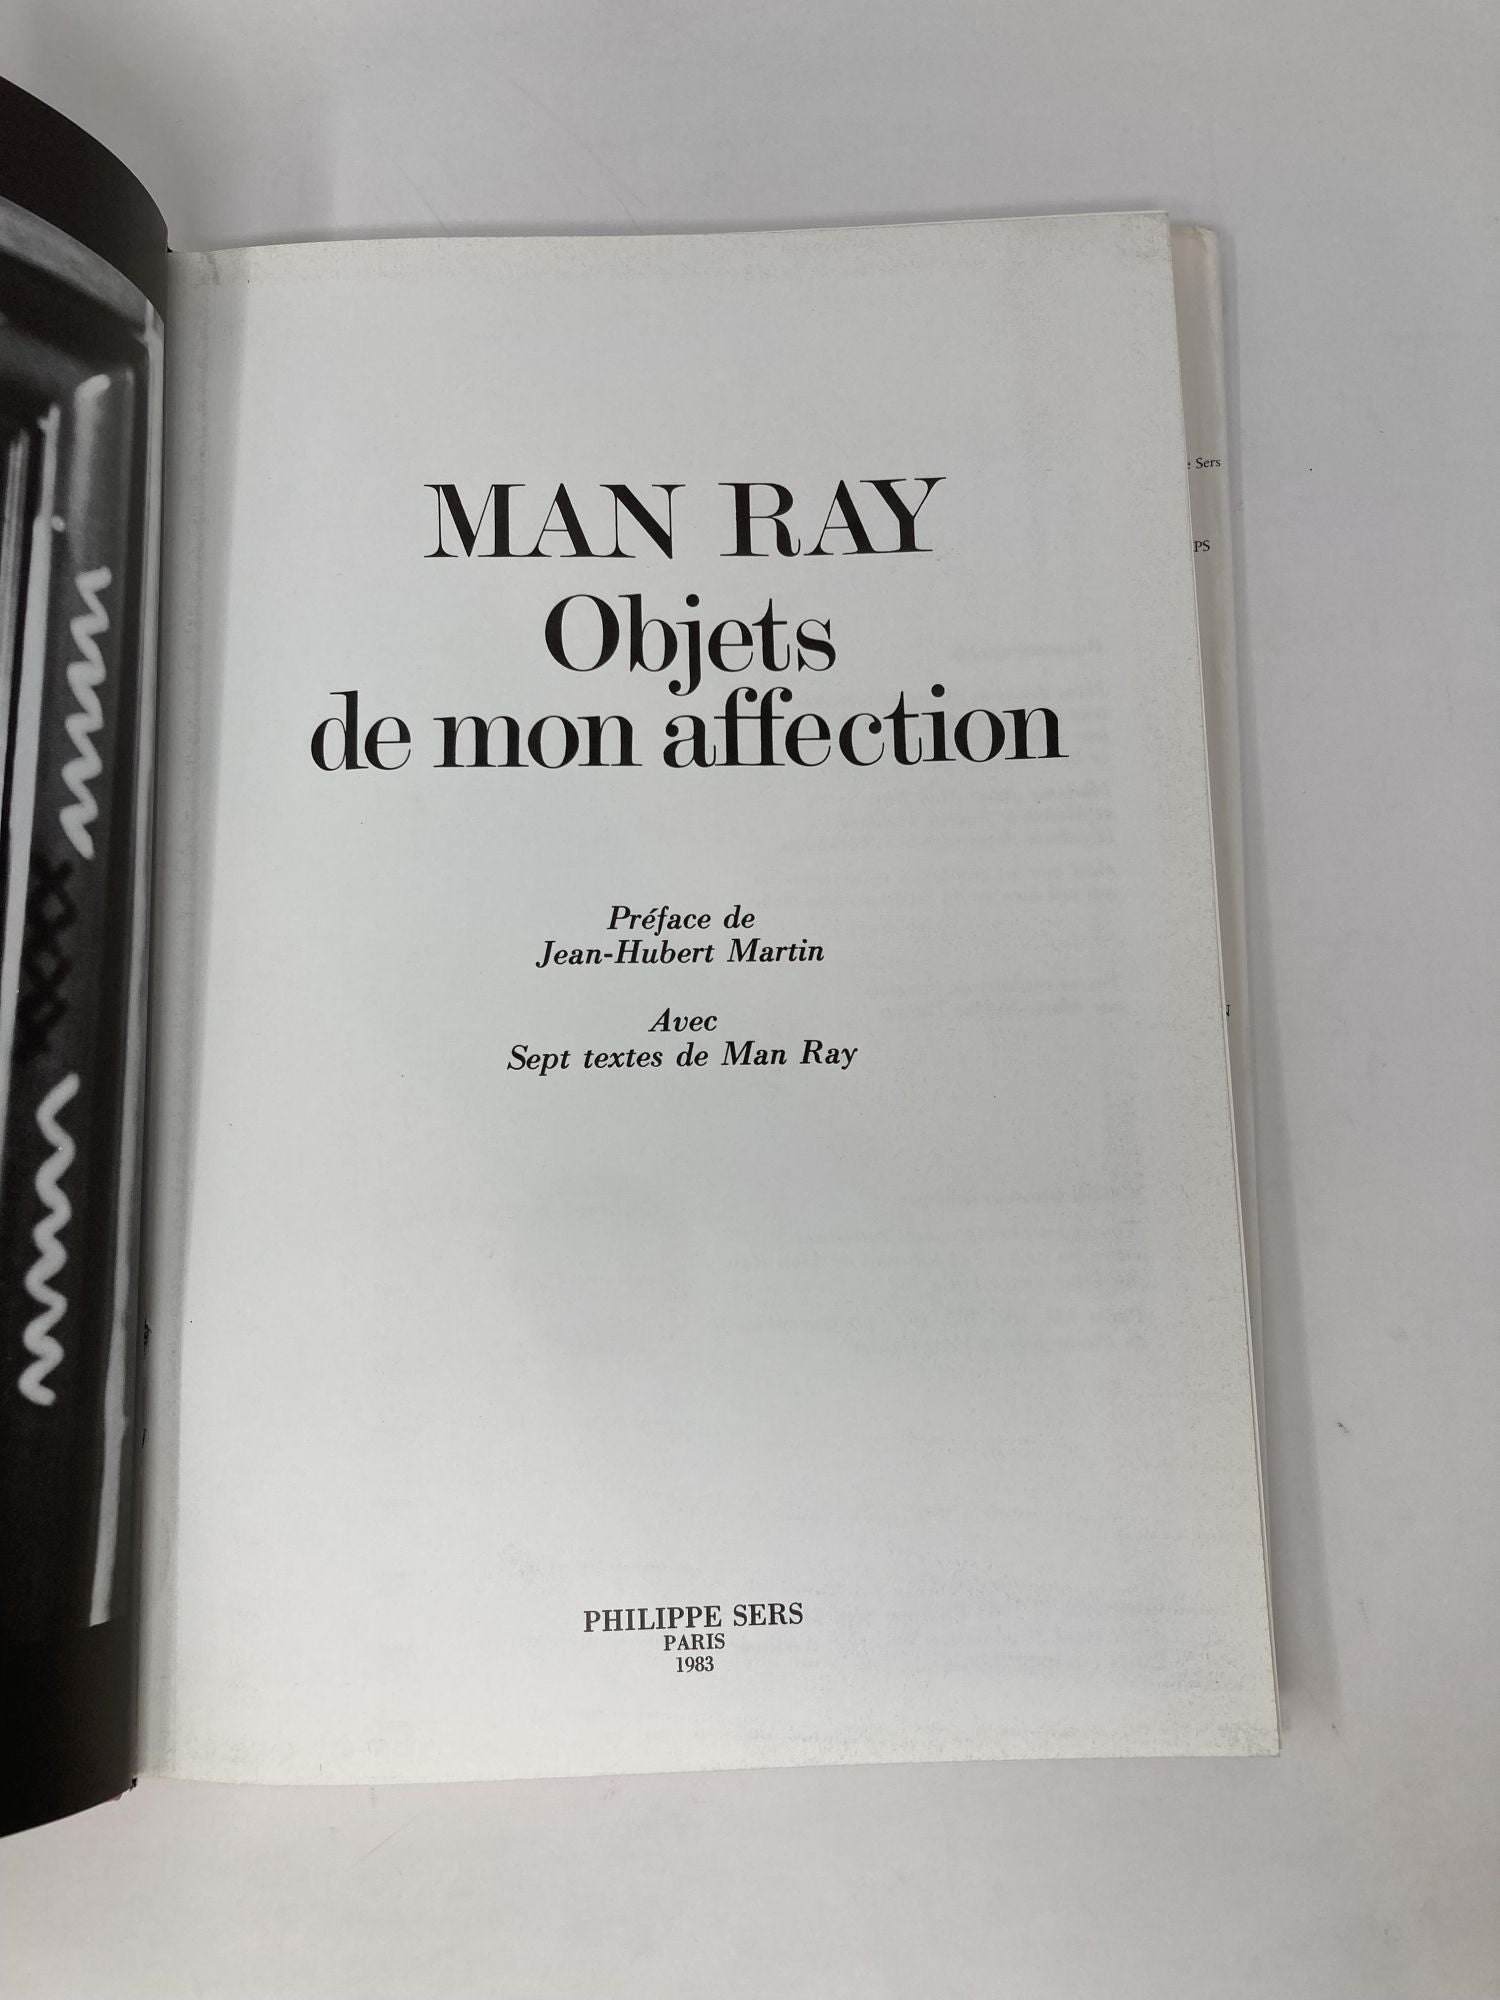 Man Ray Objets De Mon Affection: Sculptures et Objets, Catalogue Raisonné  French and English Edition by Man Ray on Sag Harbor Books